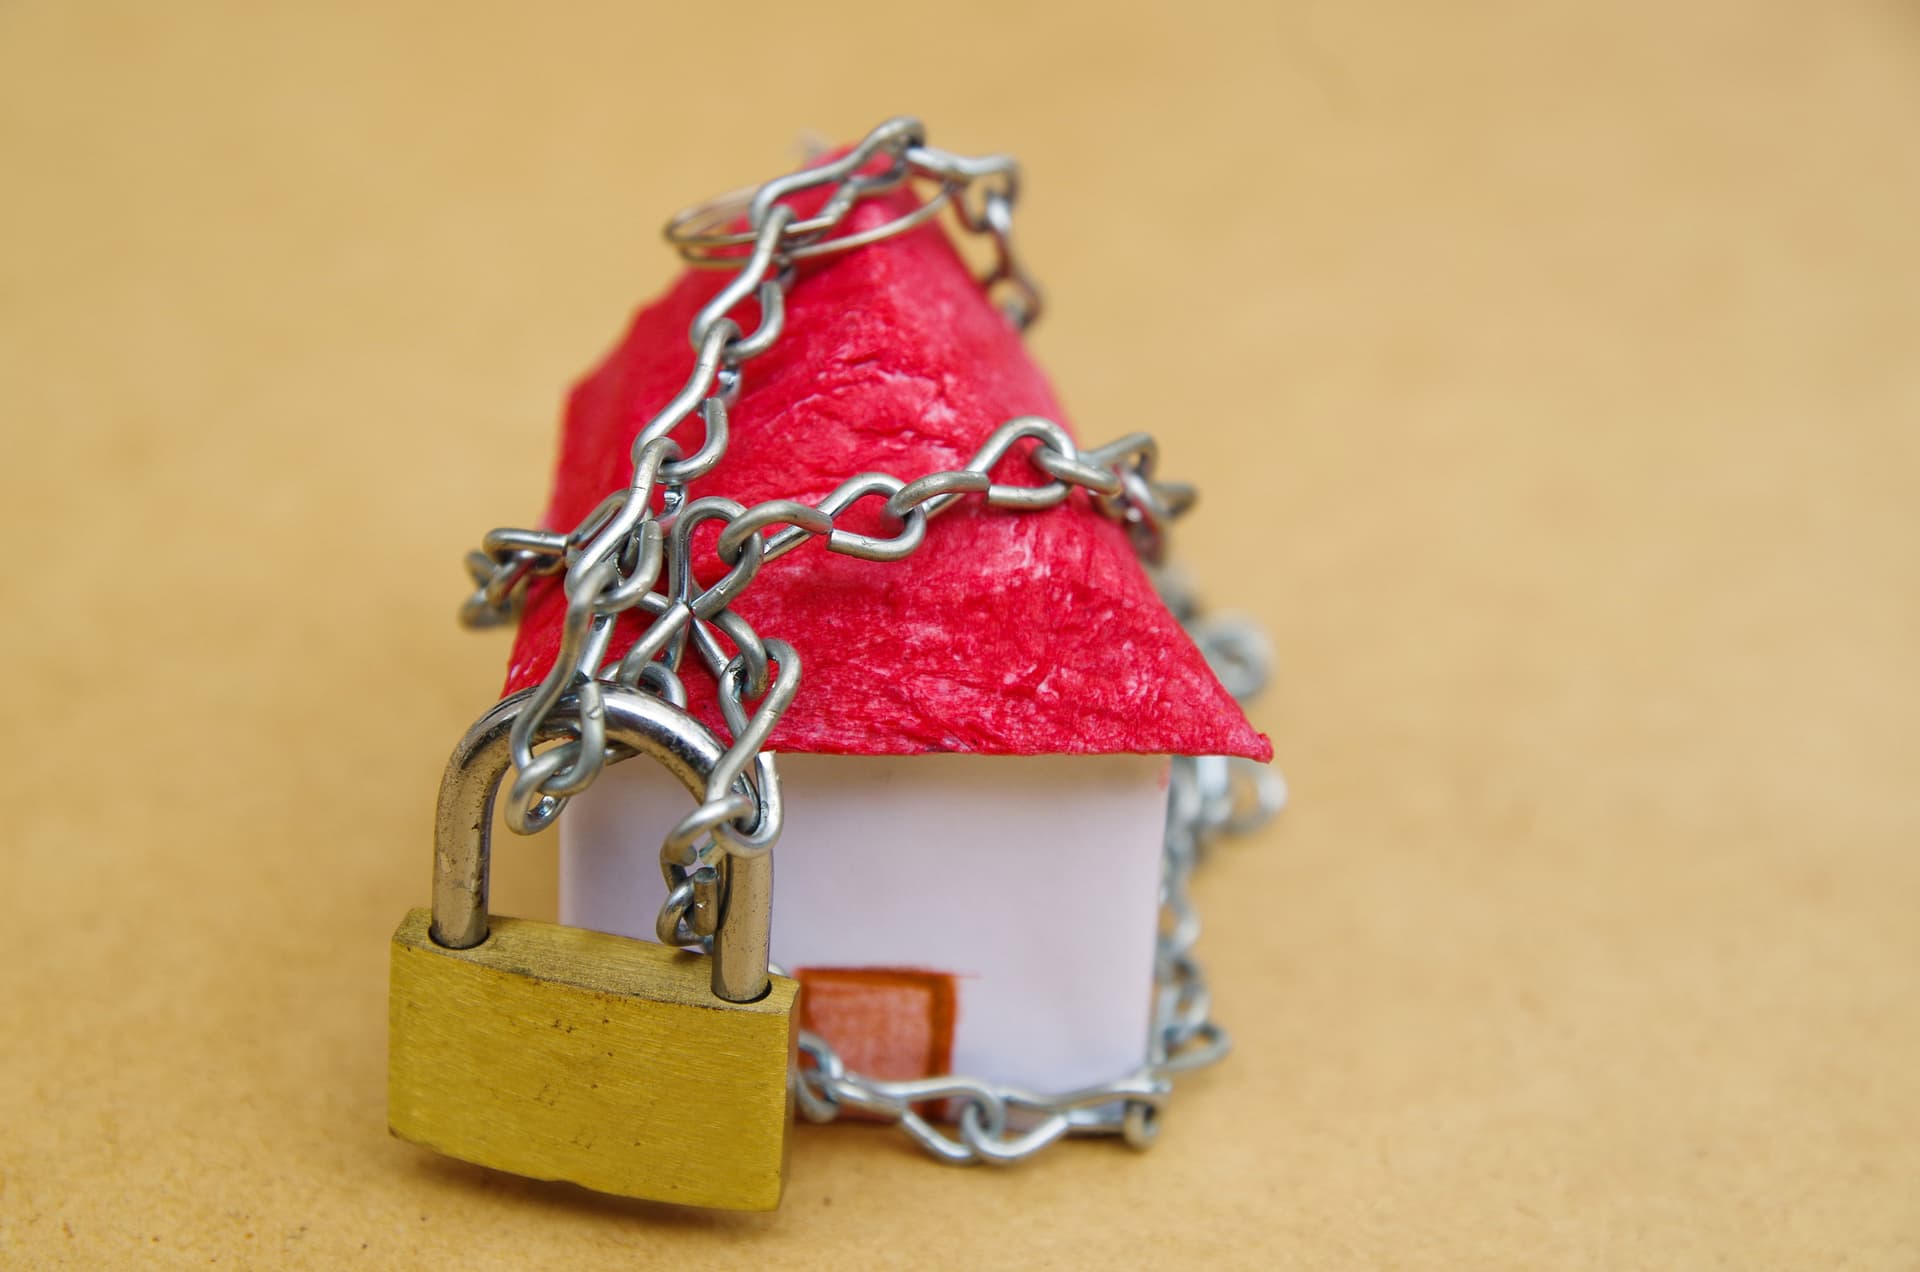 What Makes Buying A Foreclosed Property Risky